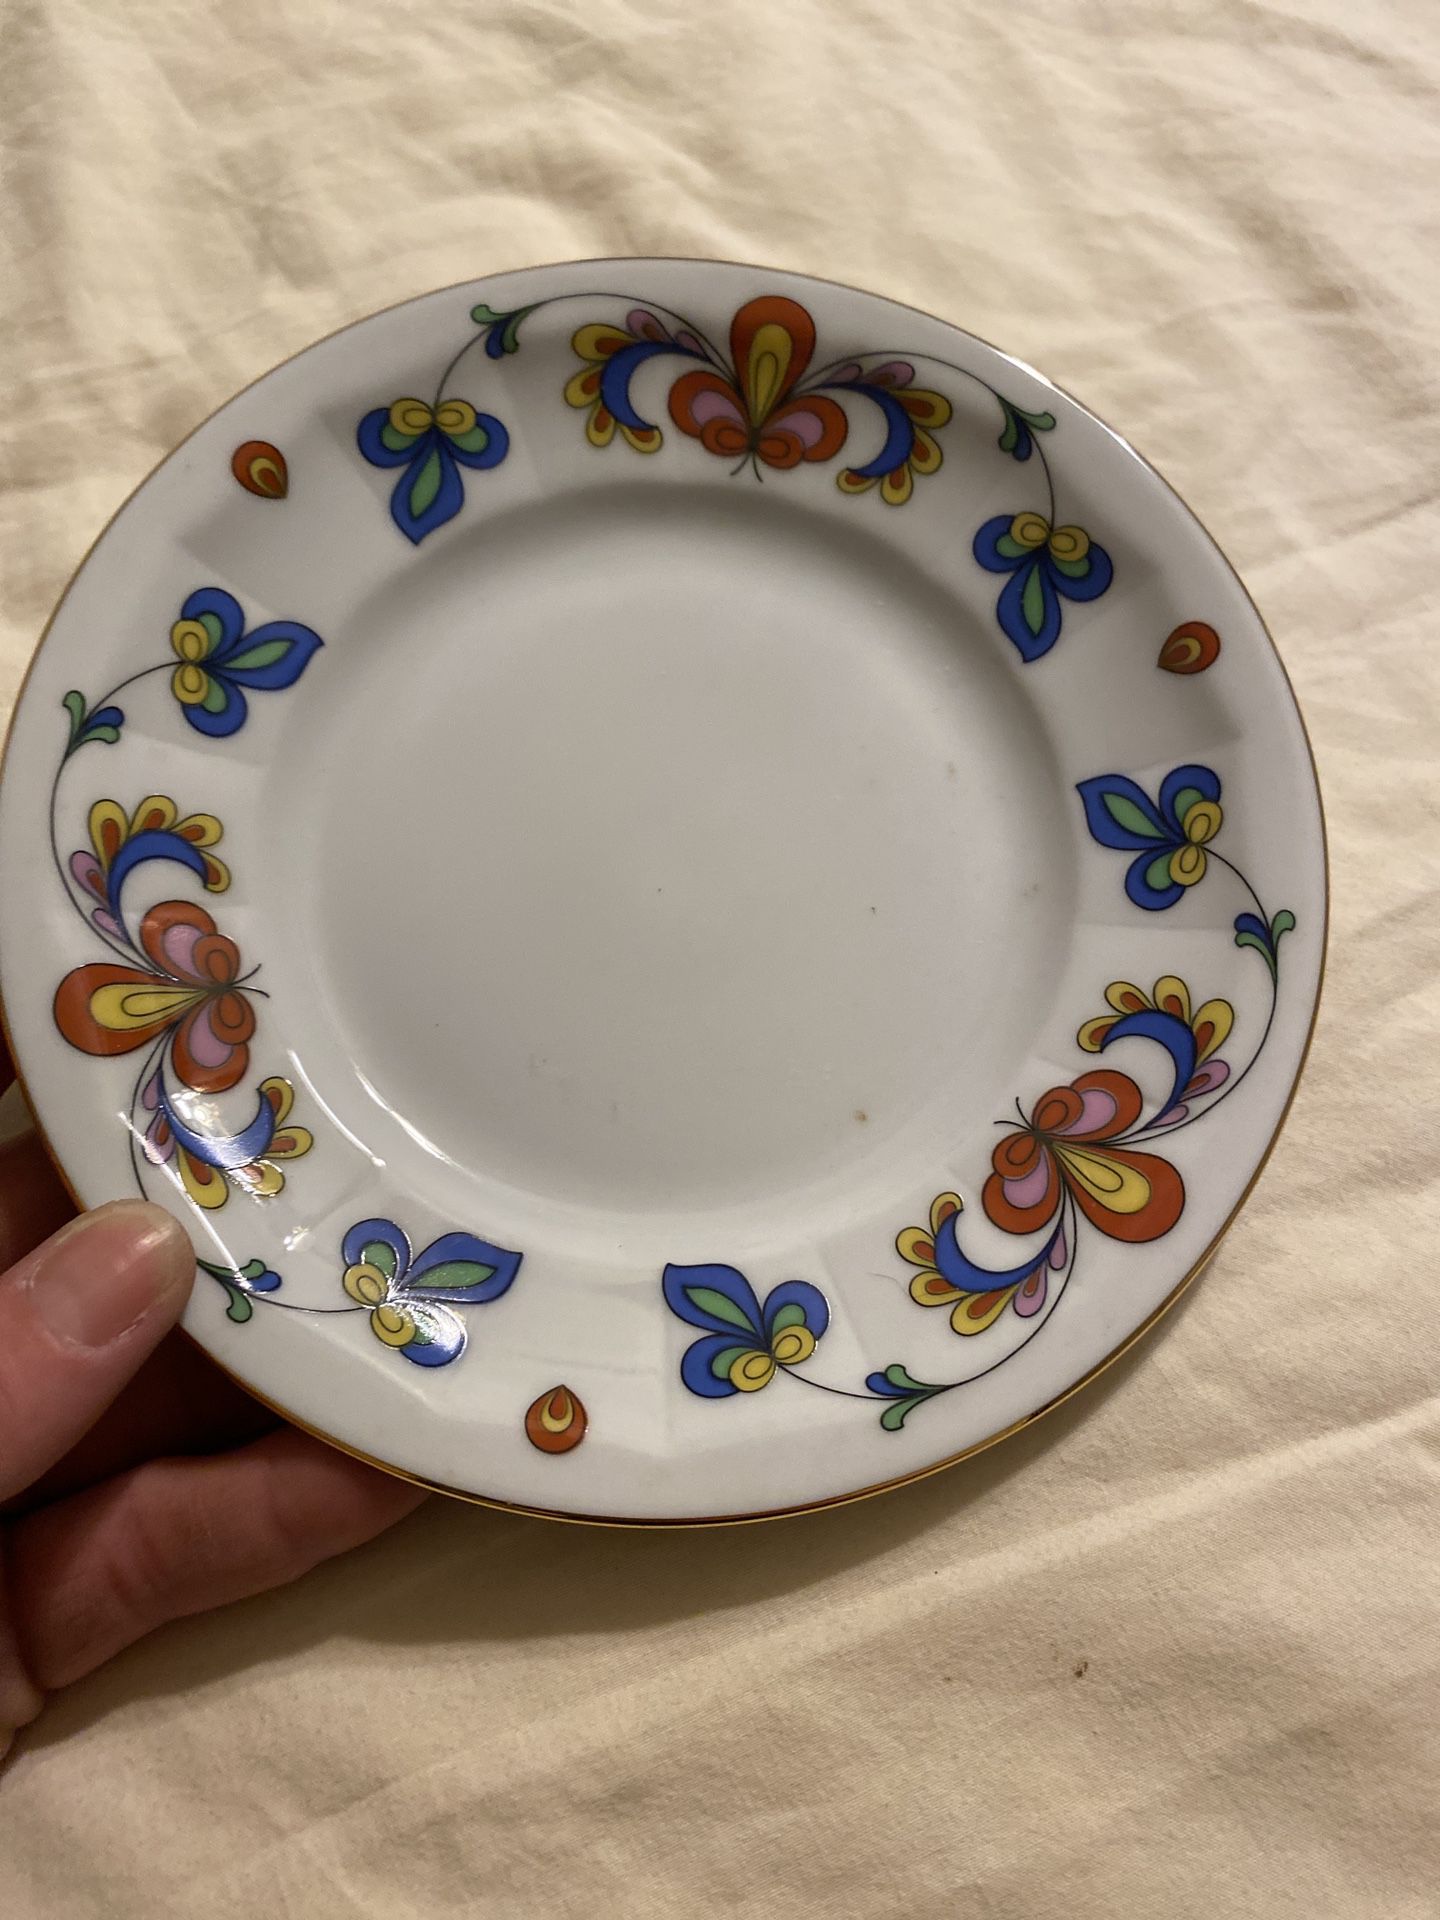 Fine china from Norway